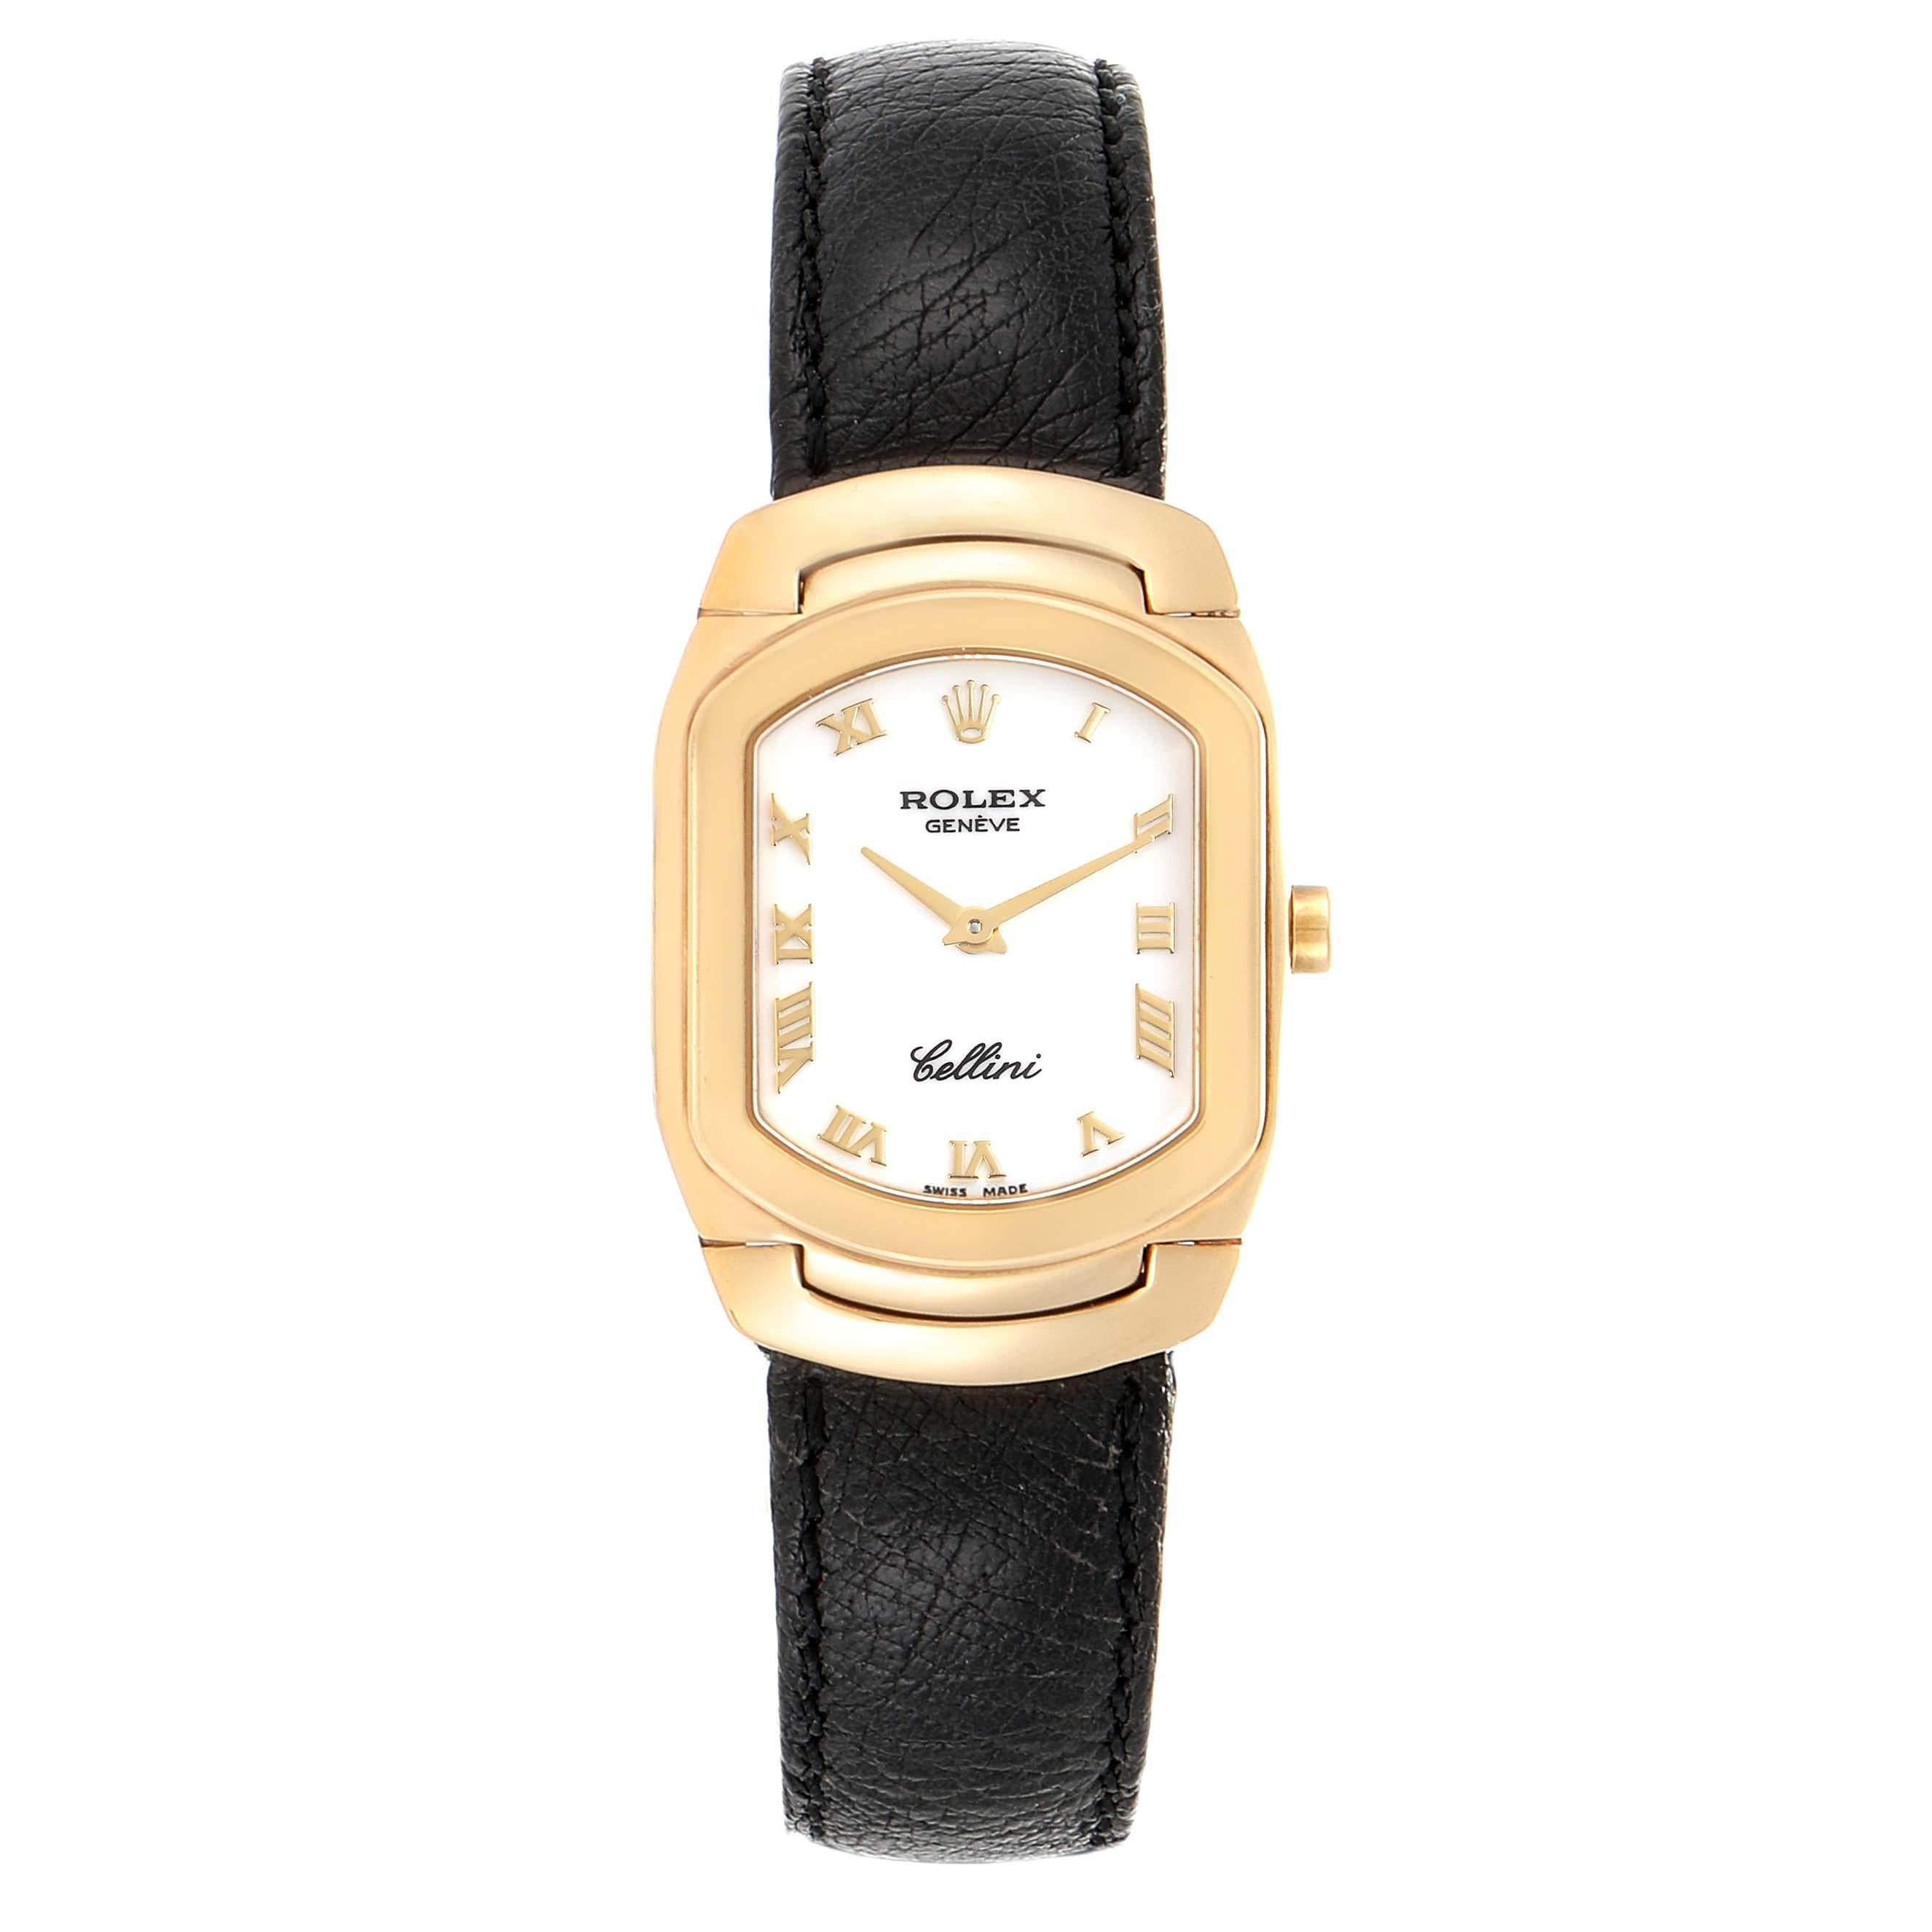 Rolex Cellini Cellissima Yellow Gold White Dial Ladies Watch 6631. Quartz movement. 18k yellow gold case 24.0 x 35.0 mm. Rolex logo on a crown. 18k yellow gold bezel. Scratch resistant sapphire crystal. White dial with raised gold roman numerals.